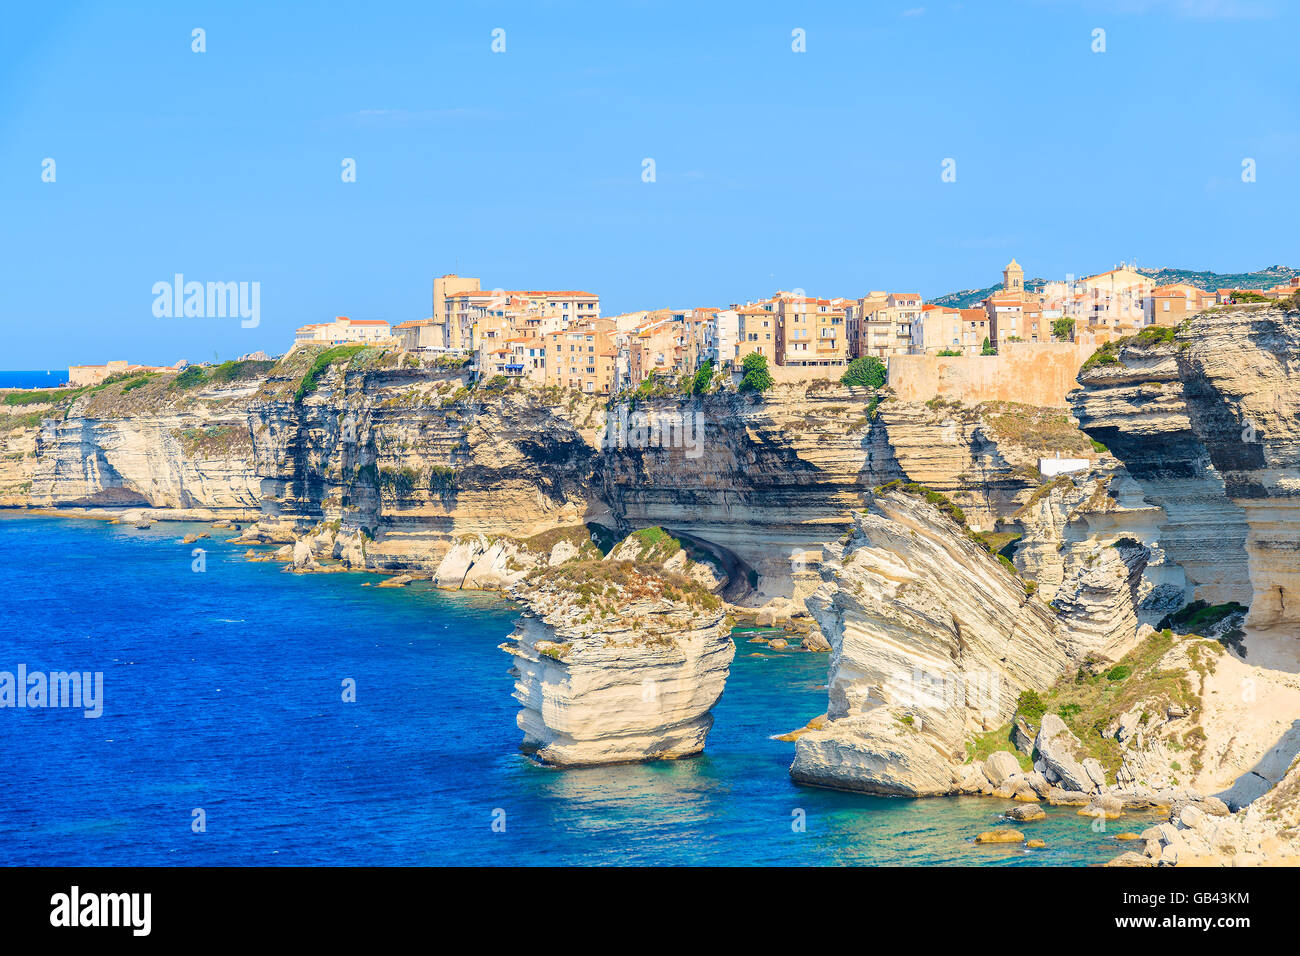 A view of Bonifacio old town built on high cliff above the sea, Corsica island, France Stock Photo